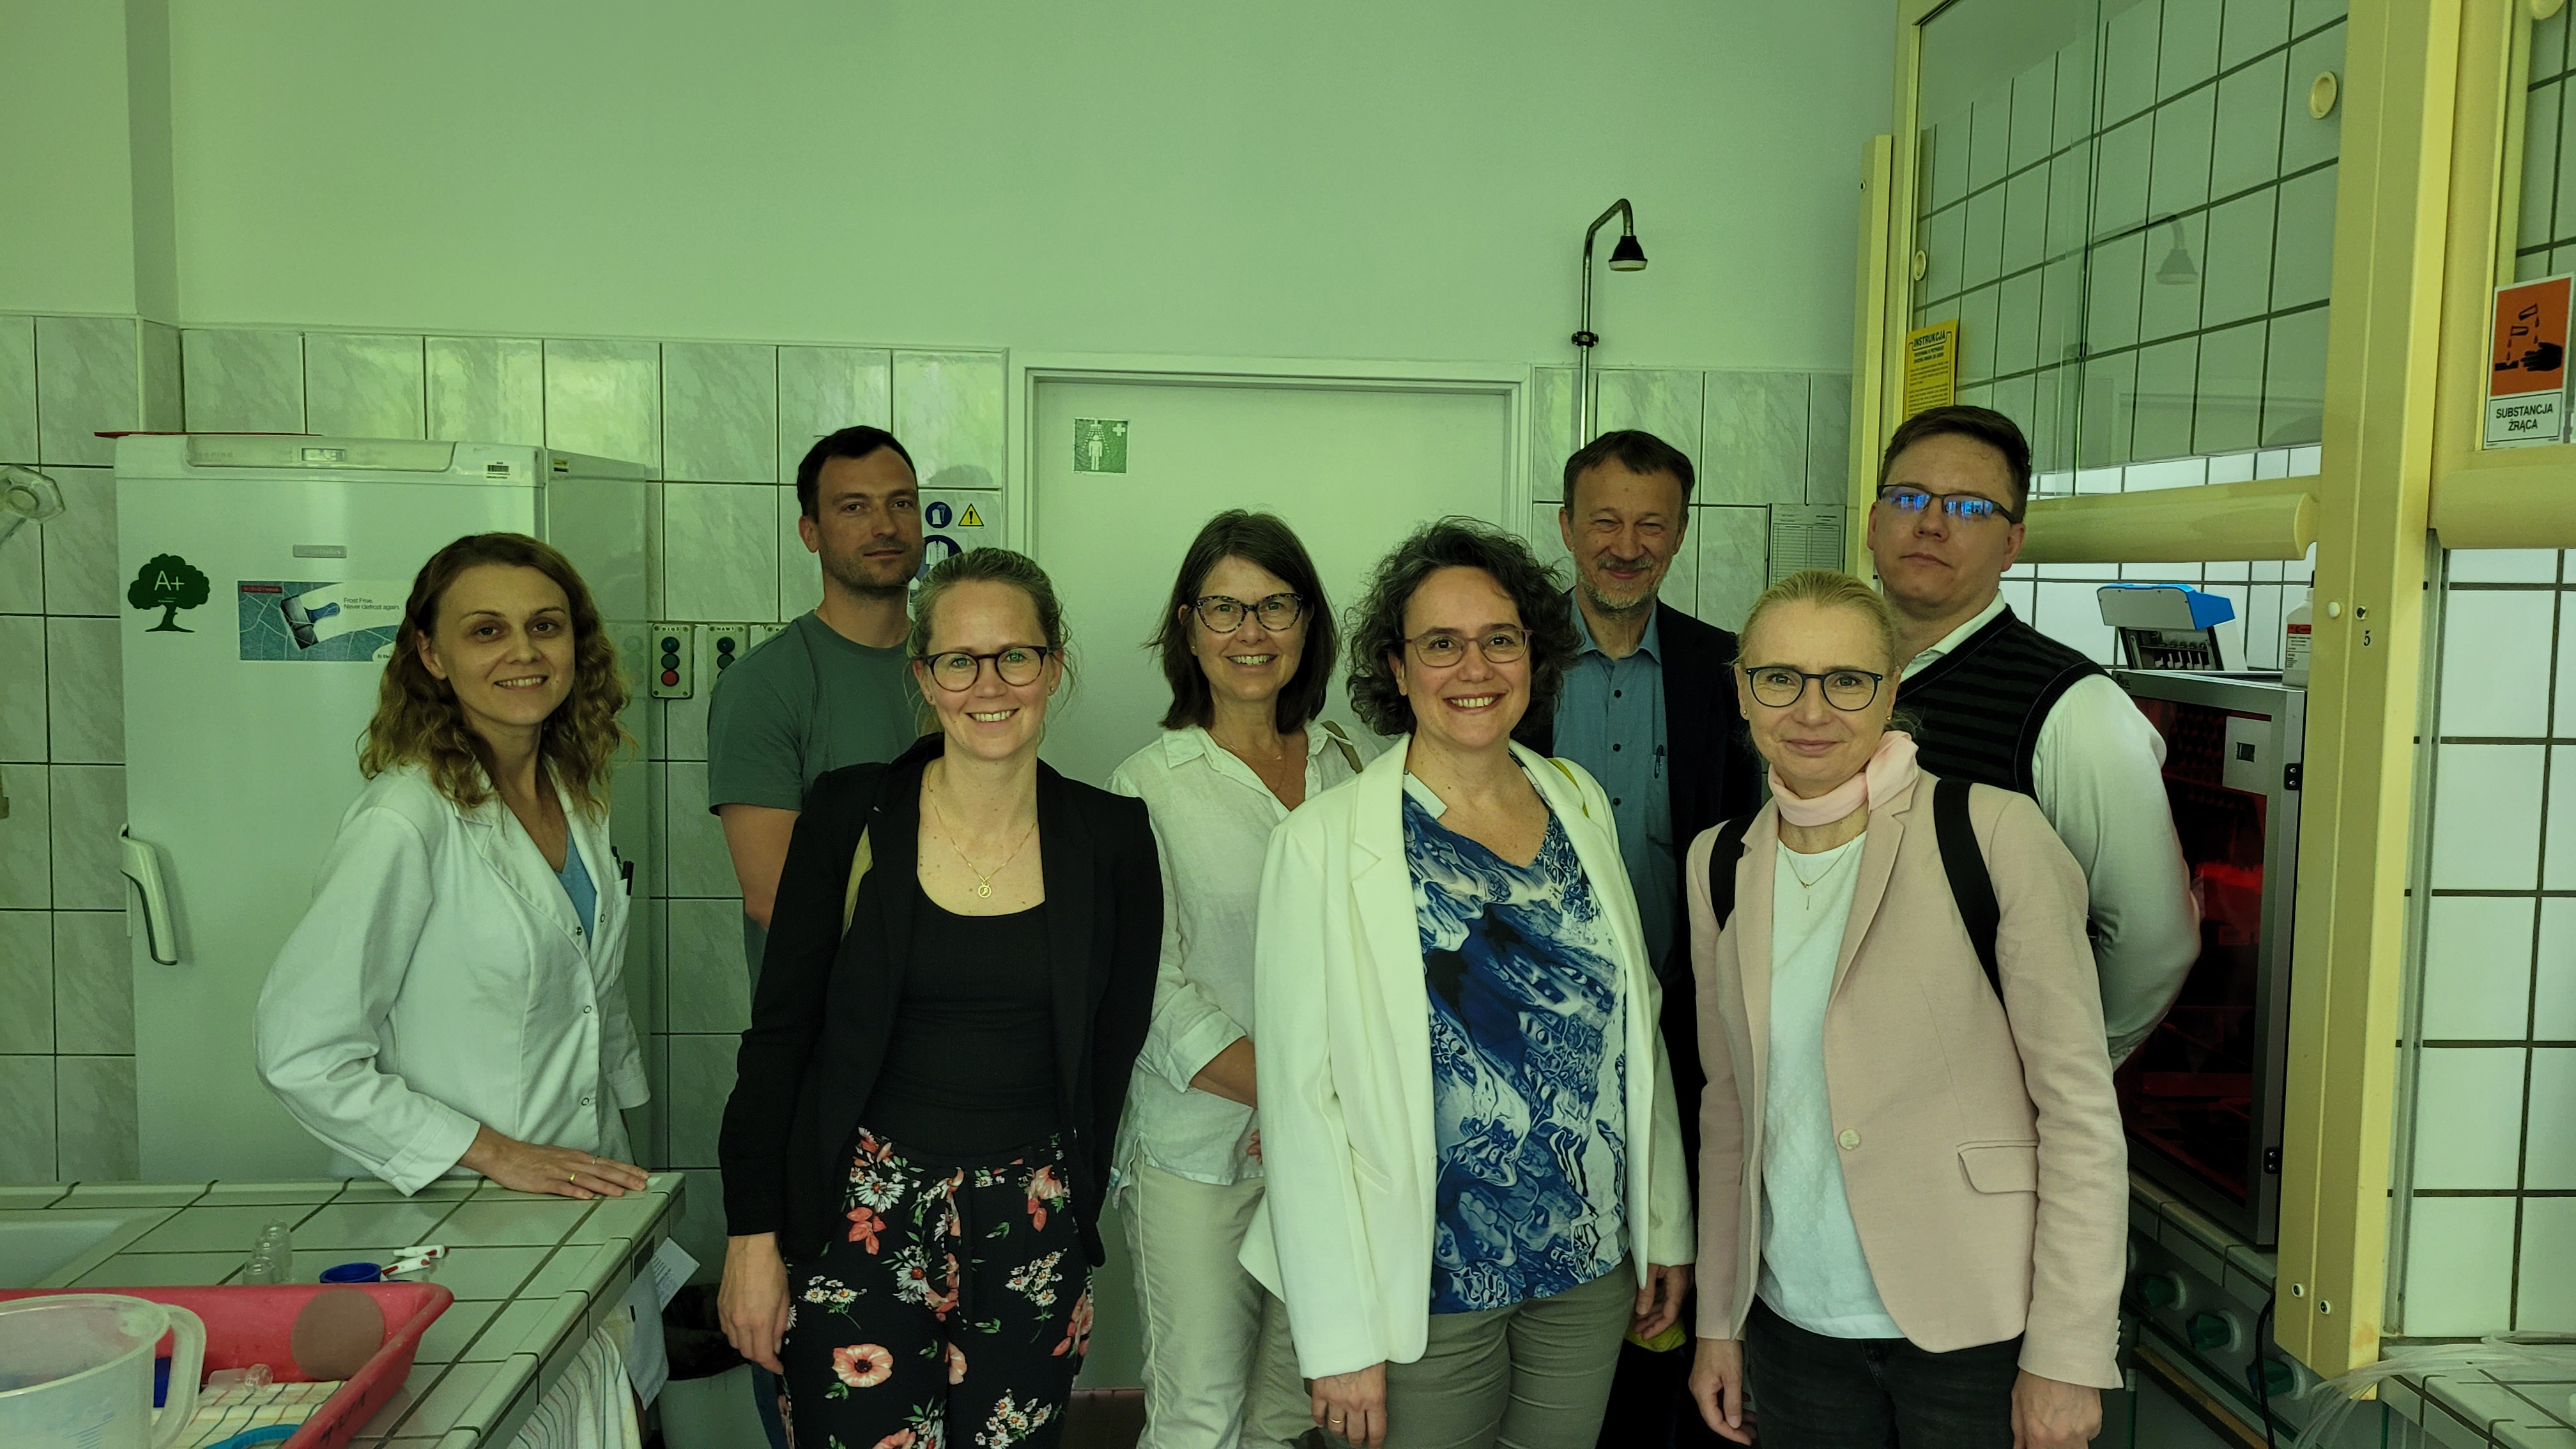 Representatives of the Norwegian Institute for Air Research accompanied by GIOŚ staff while visiting the Central Research Laboratory of the Chief Inspectorate of Environmental Protection, Warsaw Branch